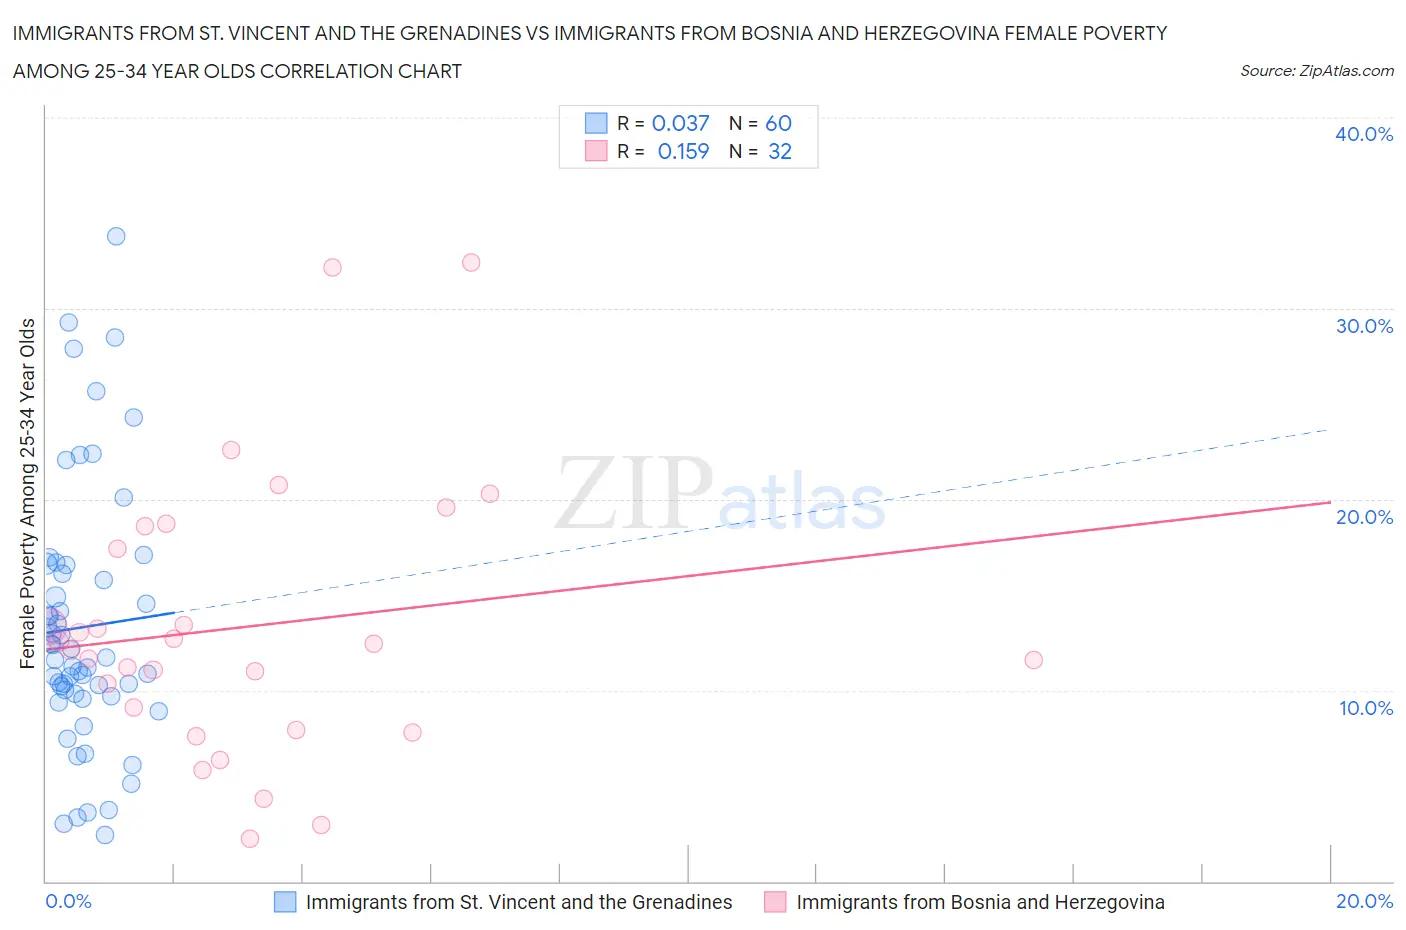 Immigrants from St. Vincent and the Grenadines vs Immigrants from Bosnia and Herzegovina Female Poverty Among 25-34 Year Olds